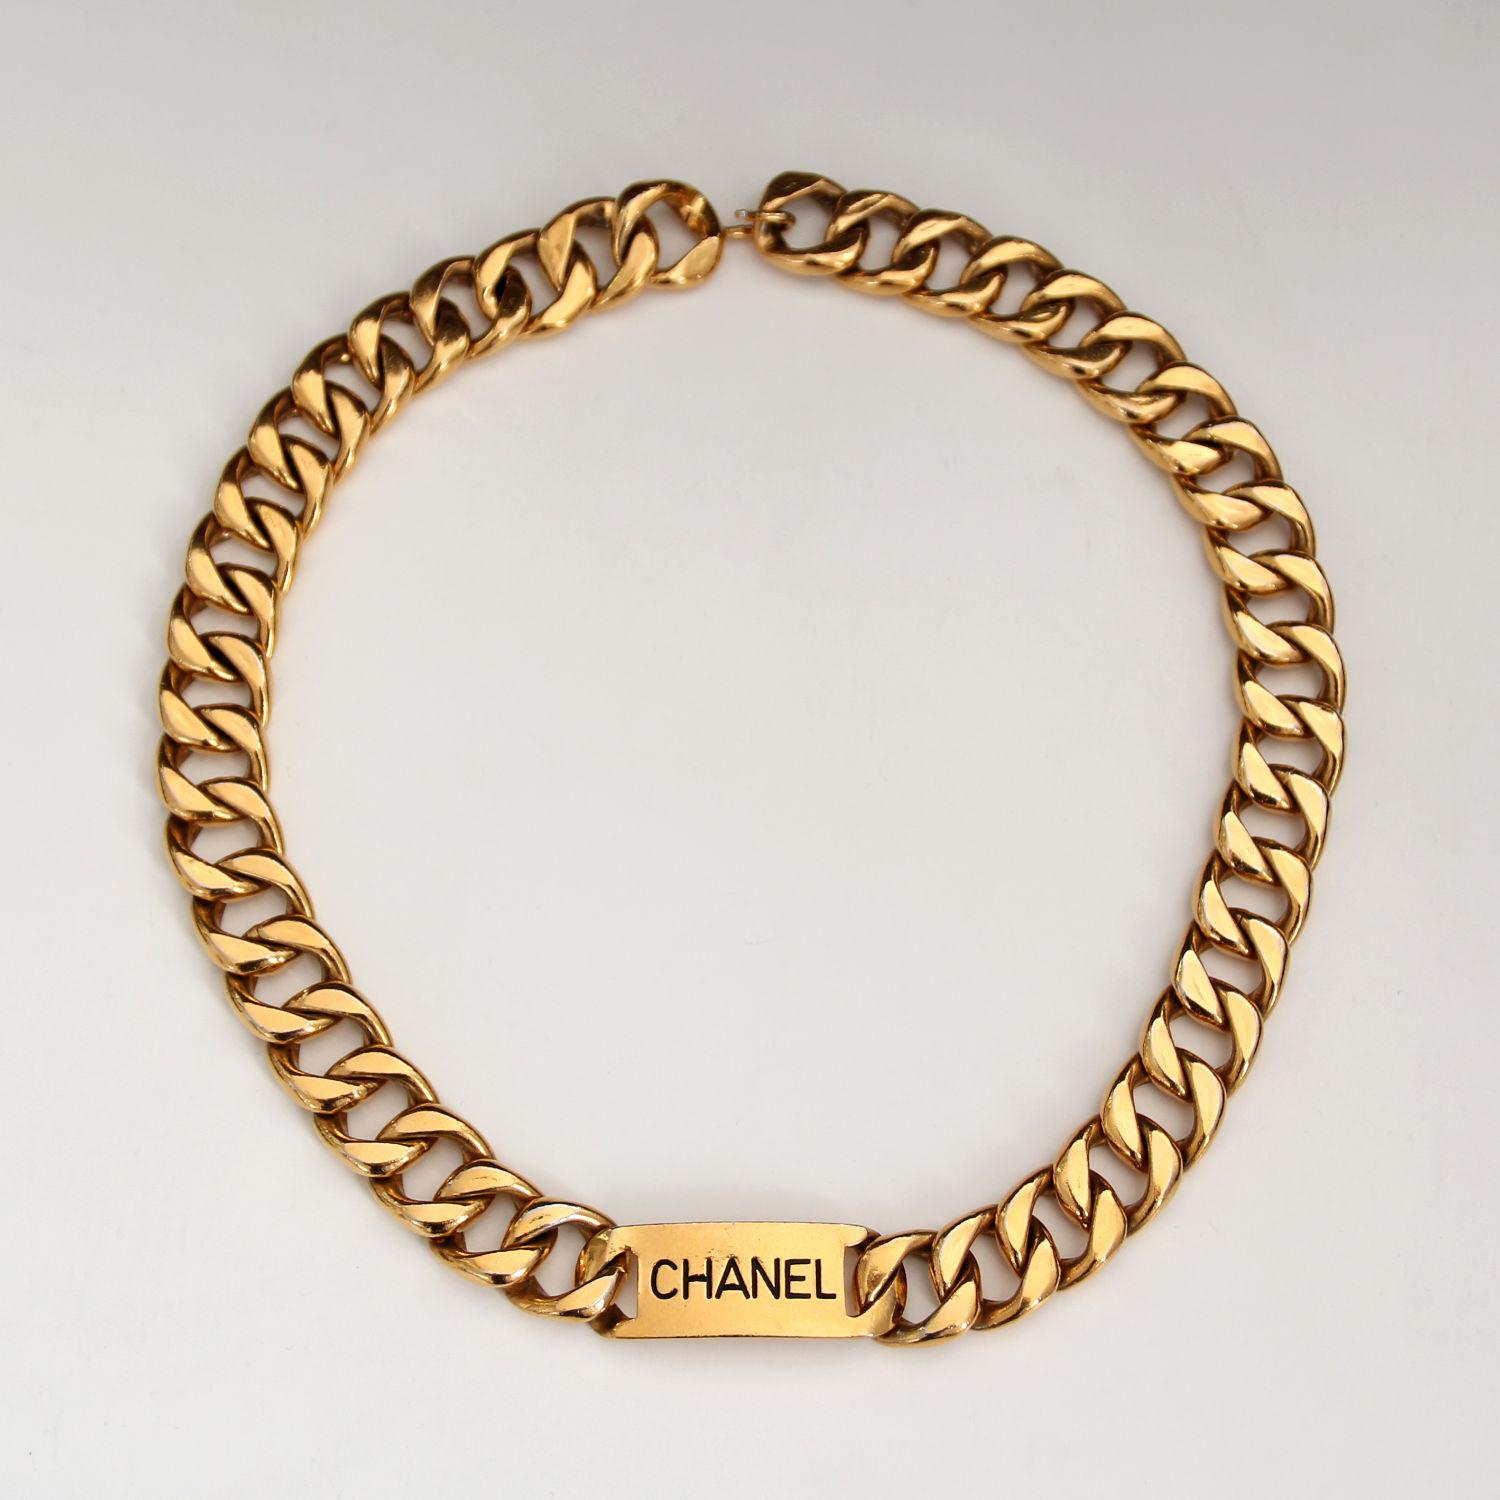 CHANEL 1990s Gold Toned Jumbo Chain Belt / Necklace With Chanel Plaque 2